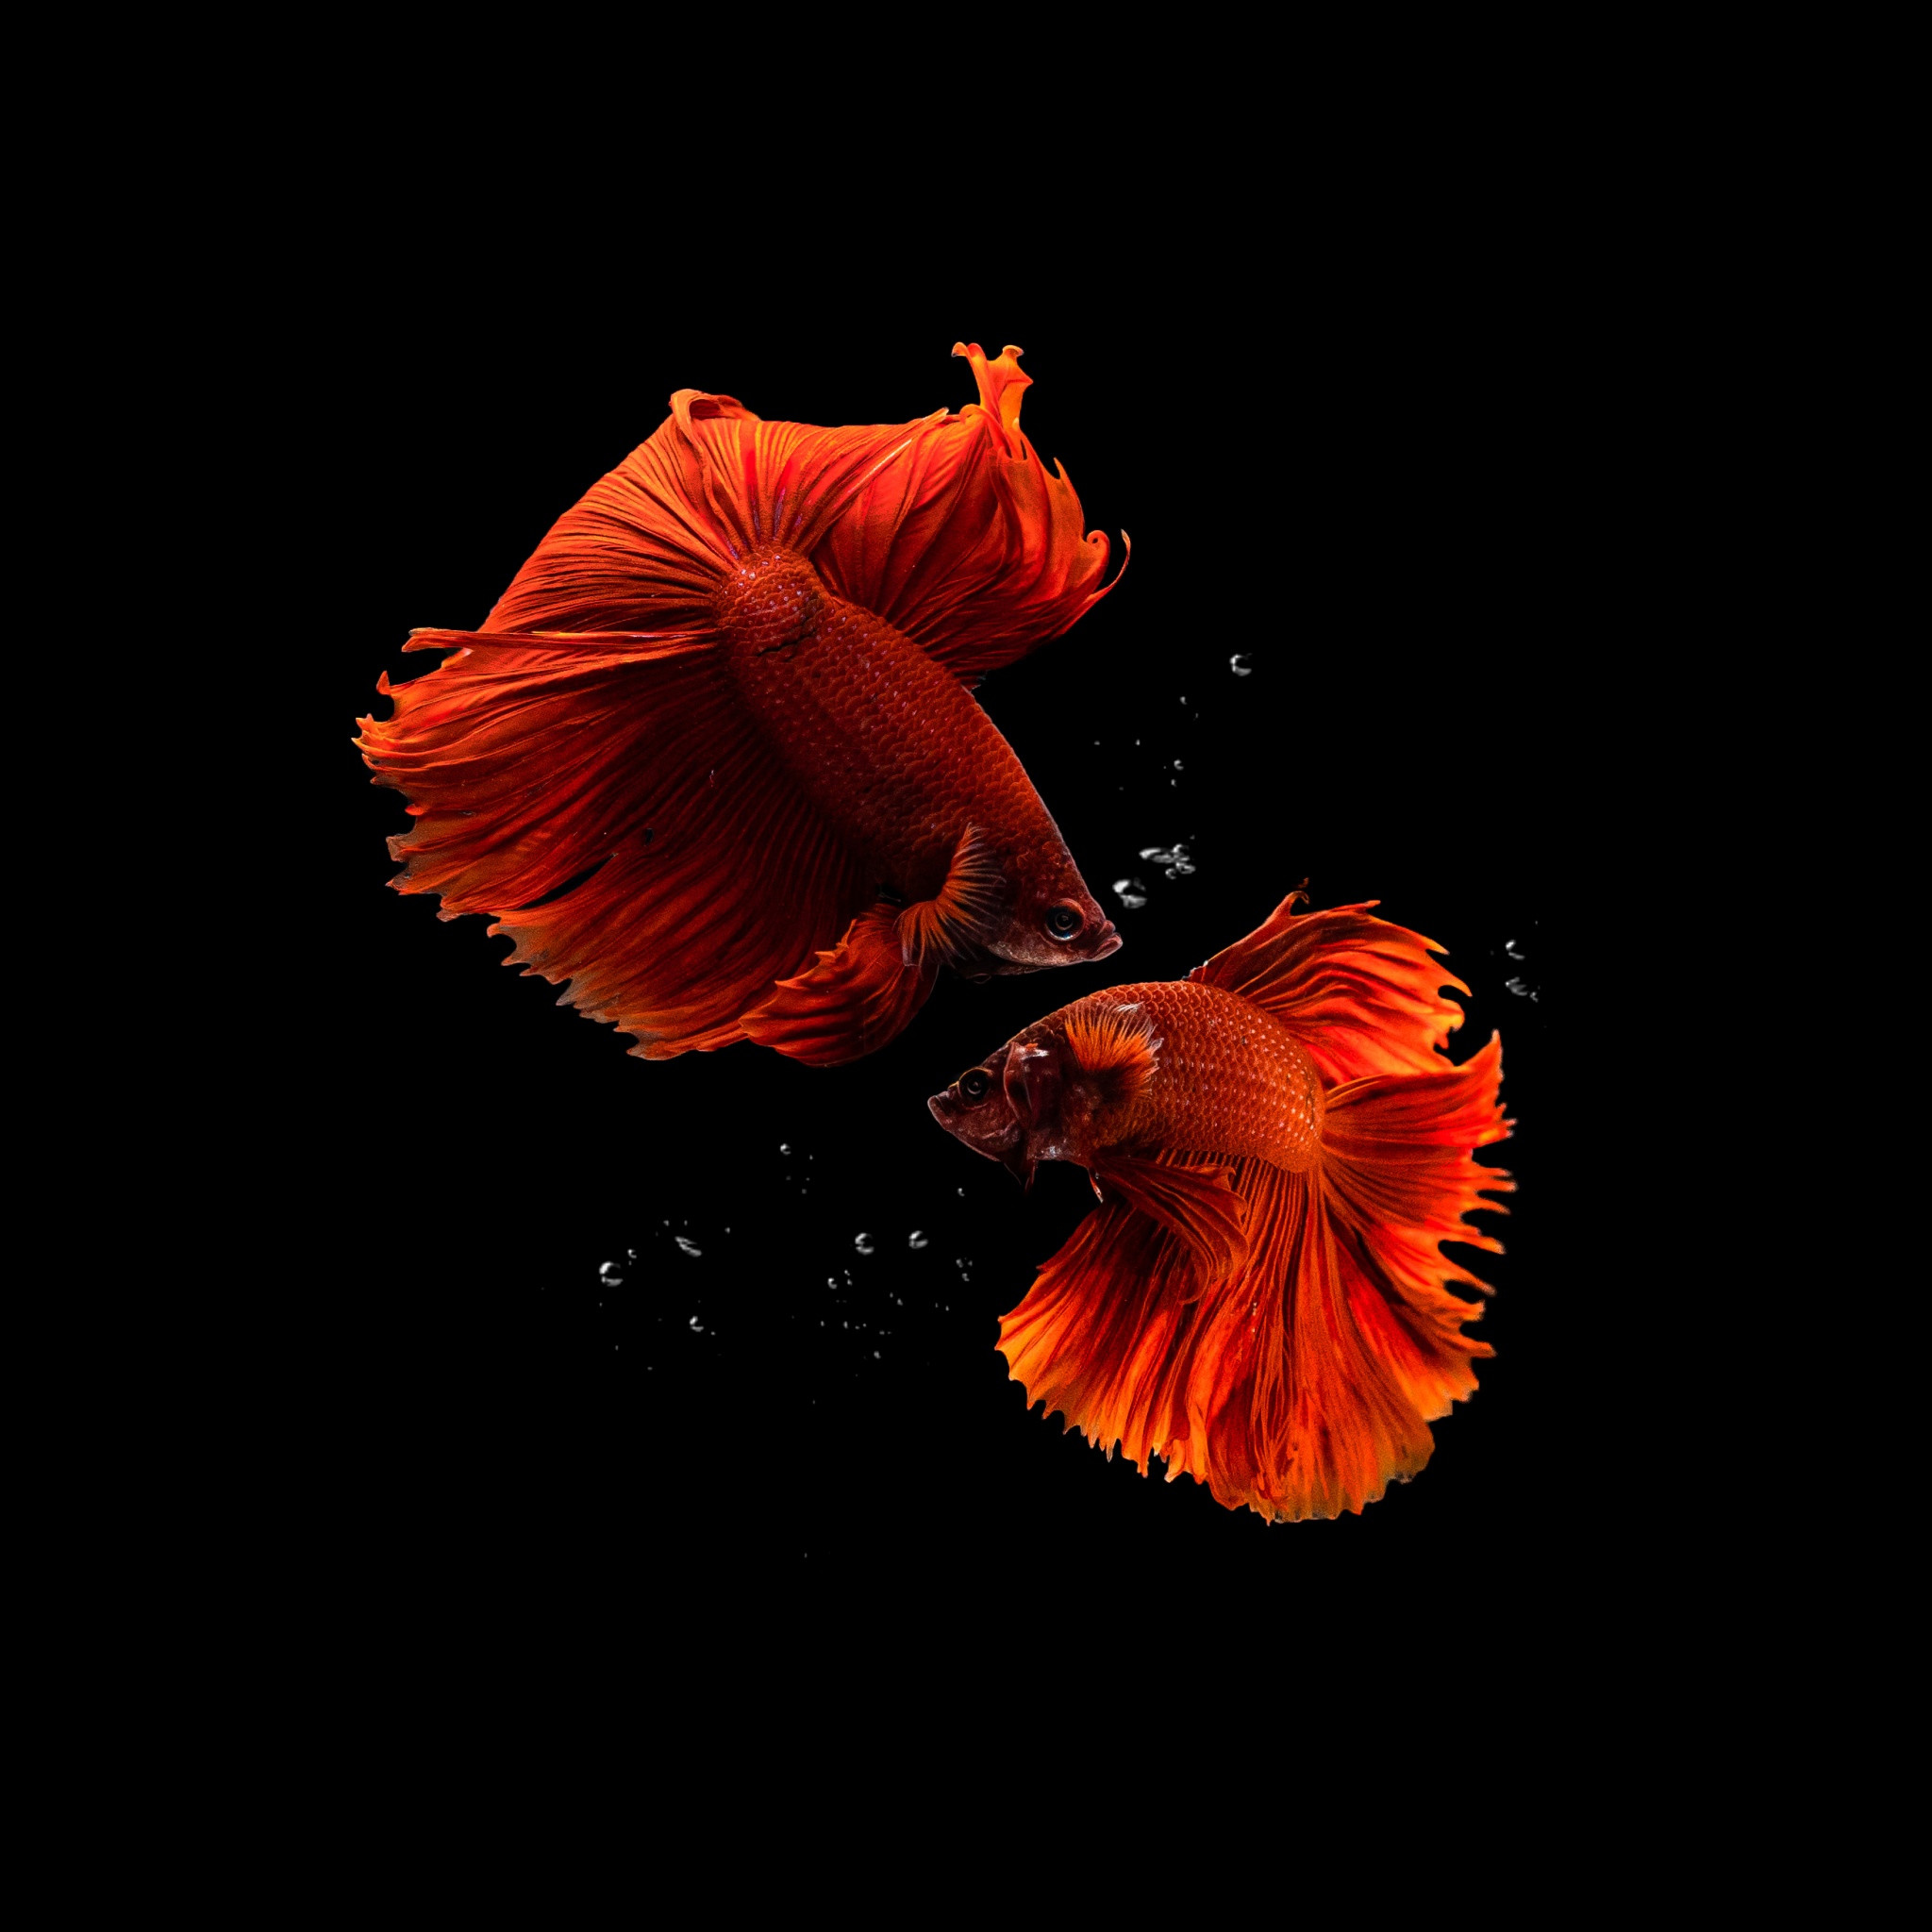 https://4kwallpapers.com/images/wallpapers/fishes-aquarium-black-background-amoled-2048x2048-8186.jpg